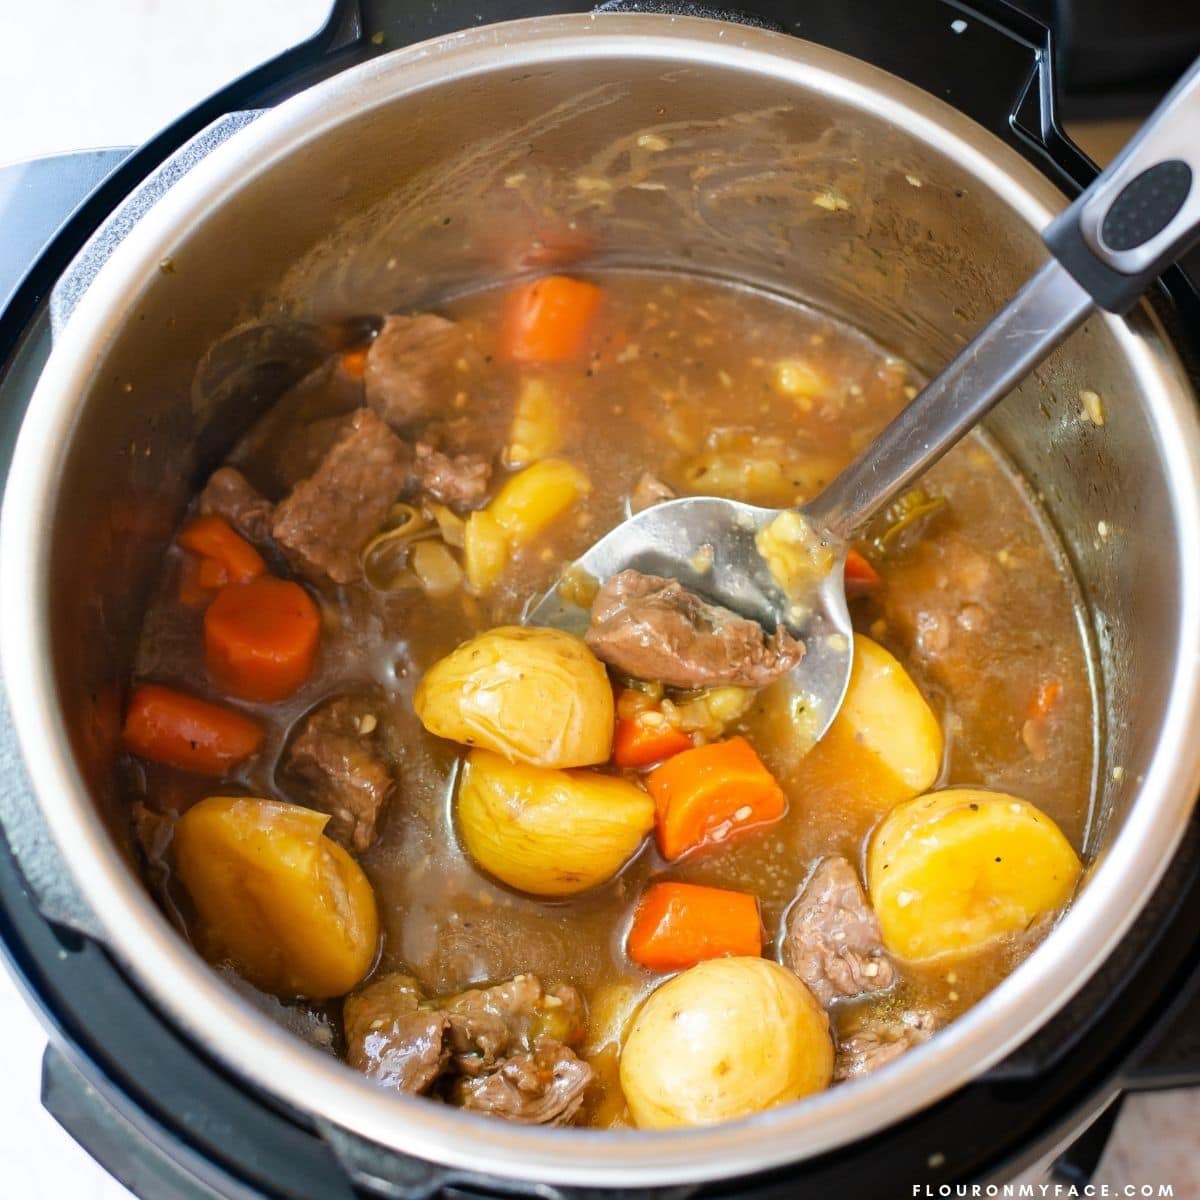 Overhead image showing beef stew with a thick gravy.